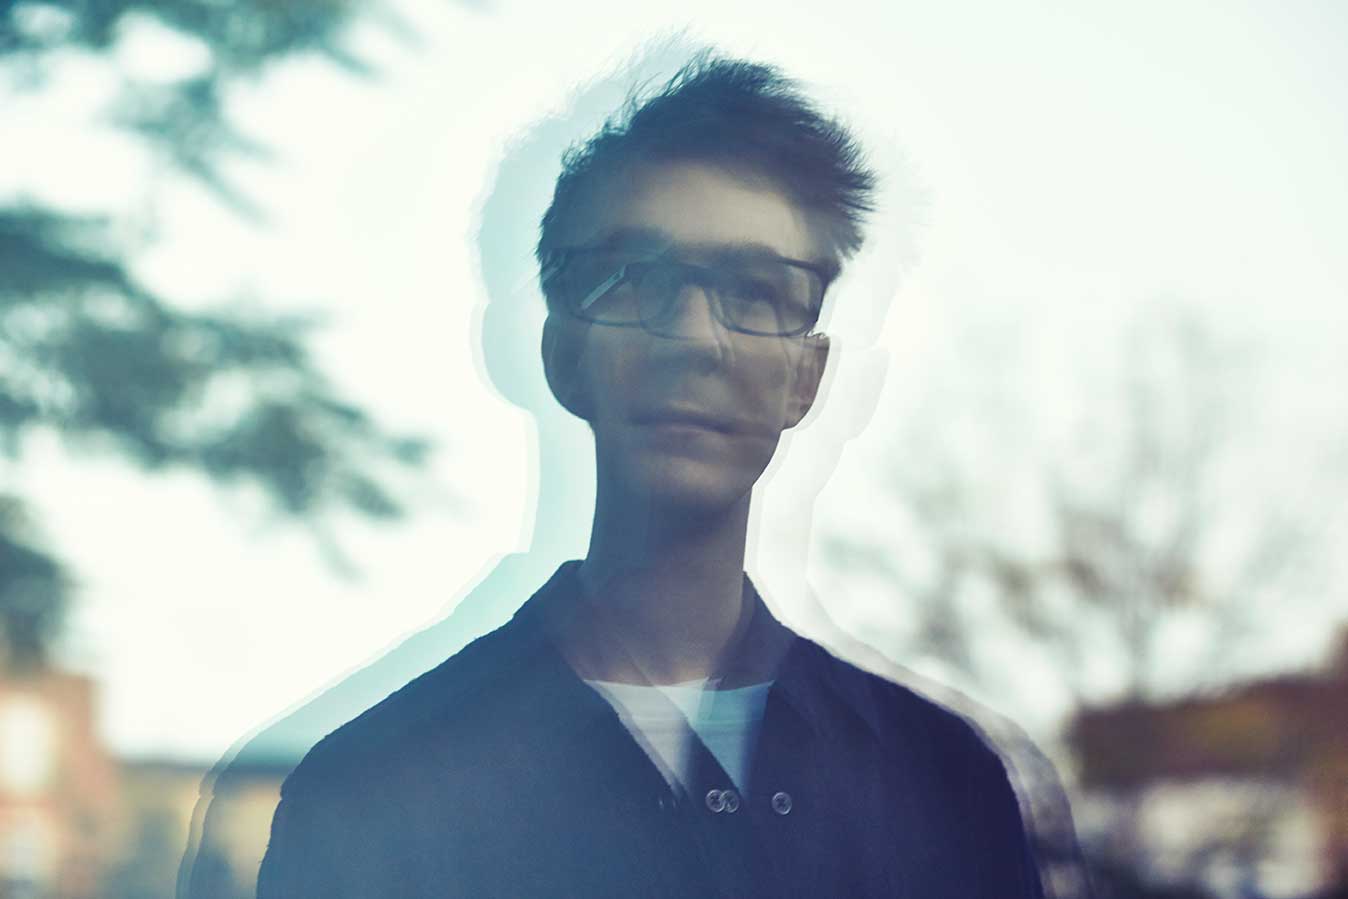 Ben UFO announces XOYO residency stacked with guests